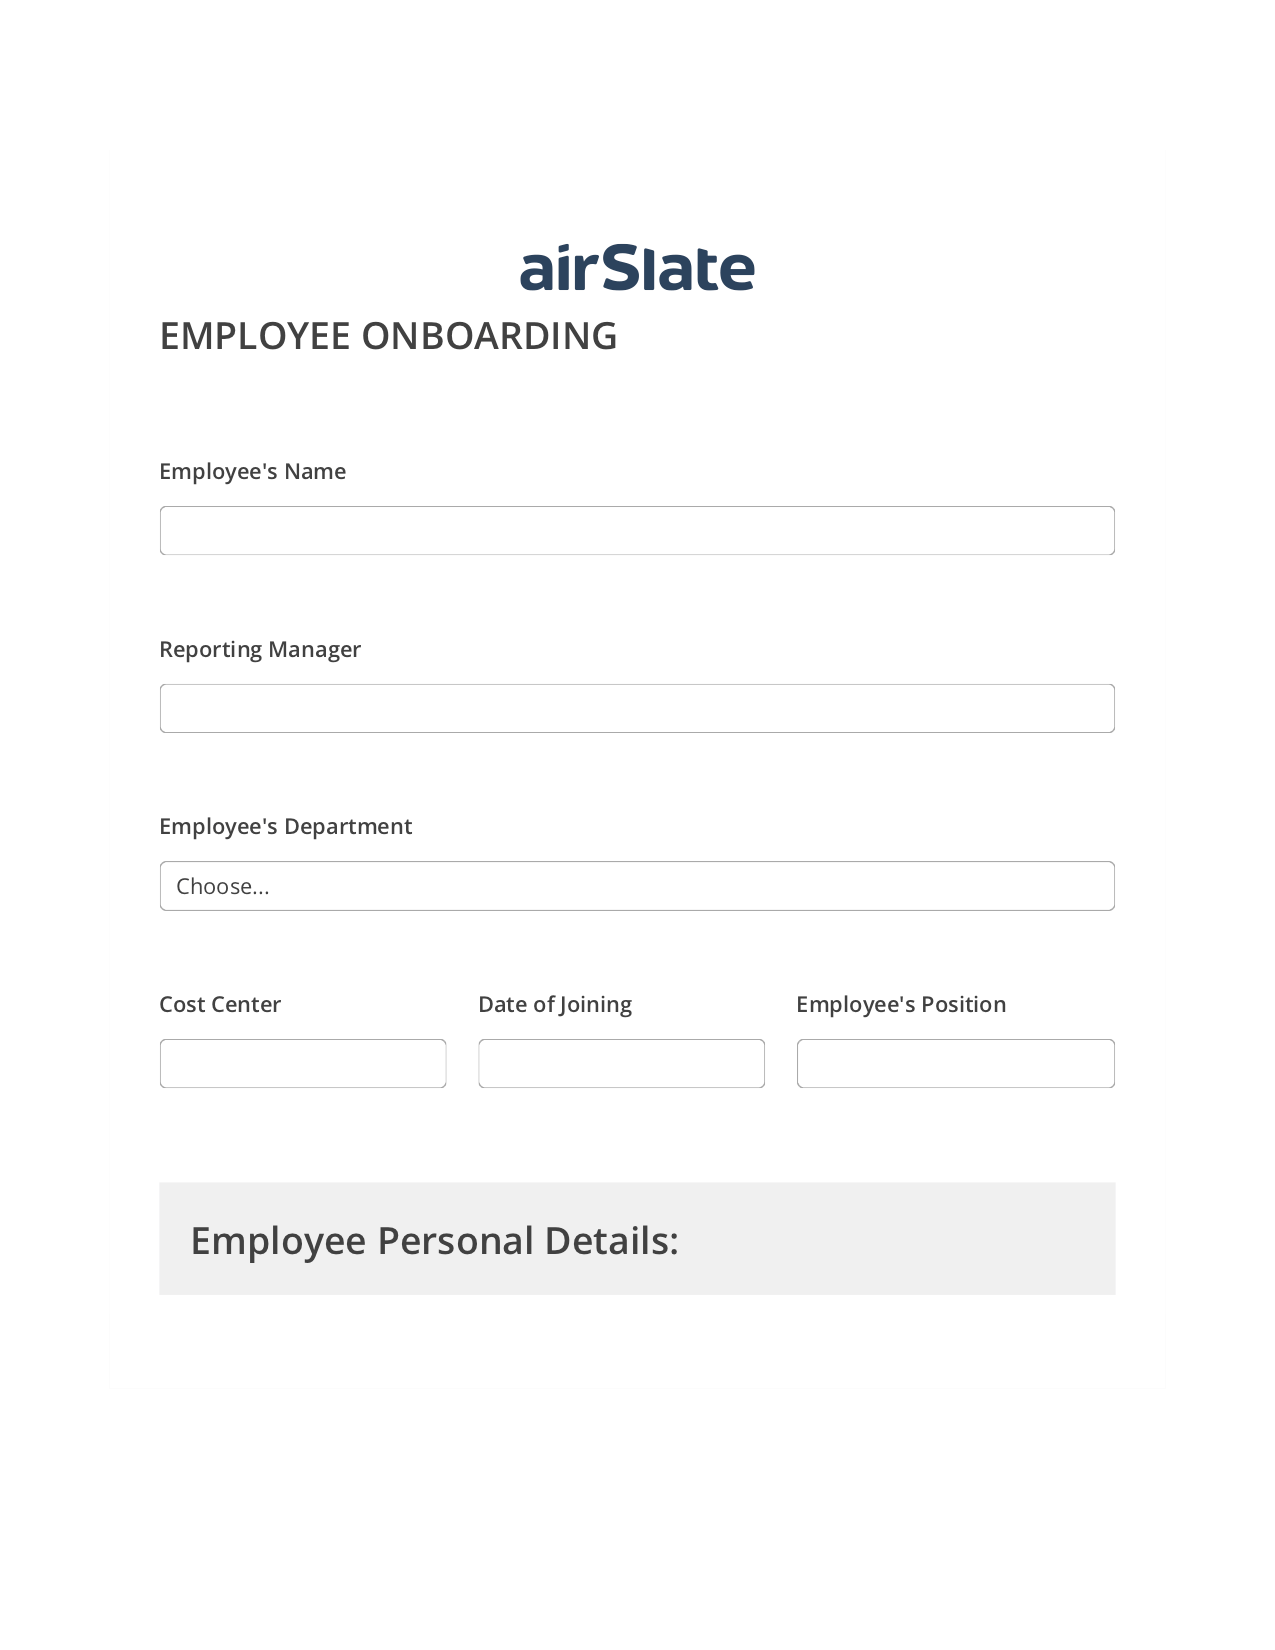 Employee Onboarding Workflow Pre-fill from Salesforce Records with SOQL Bot, Jira Bot, Archive to SharePoint Folder Bot